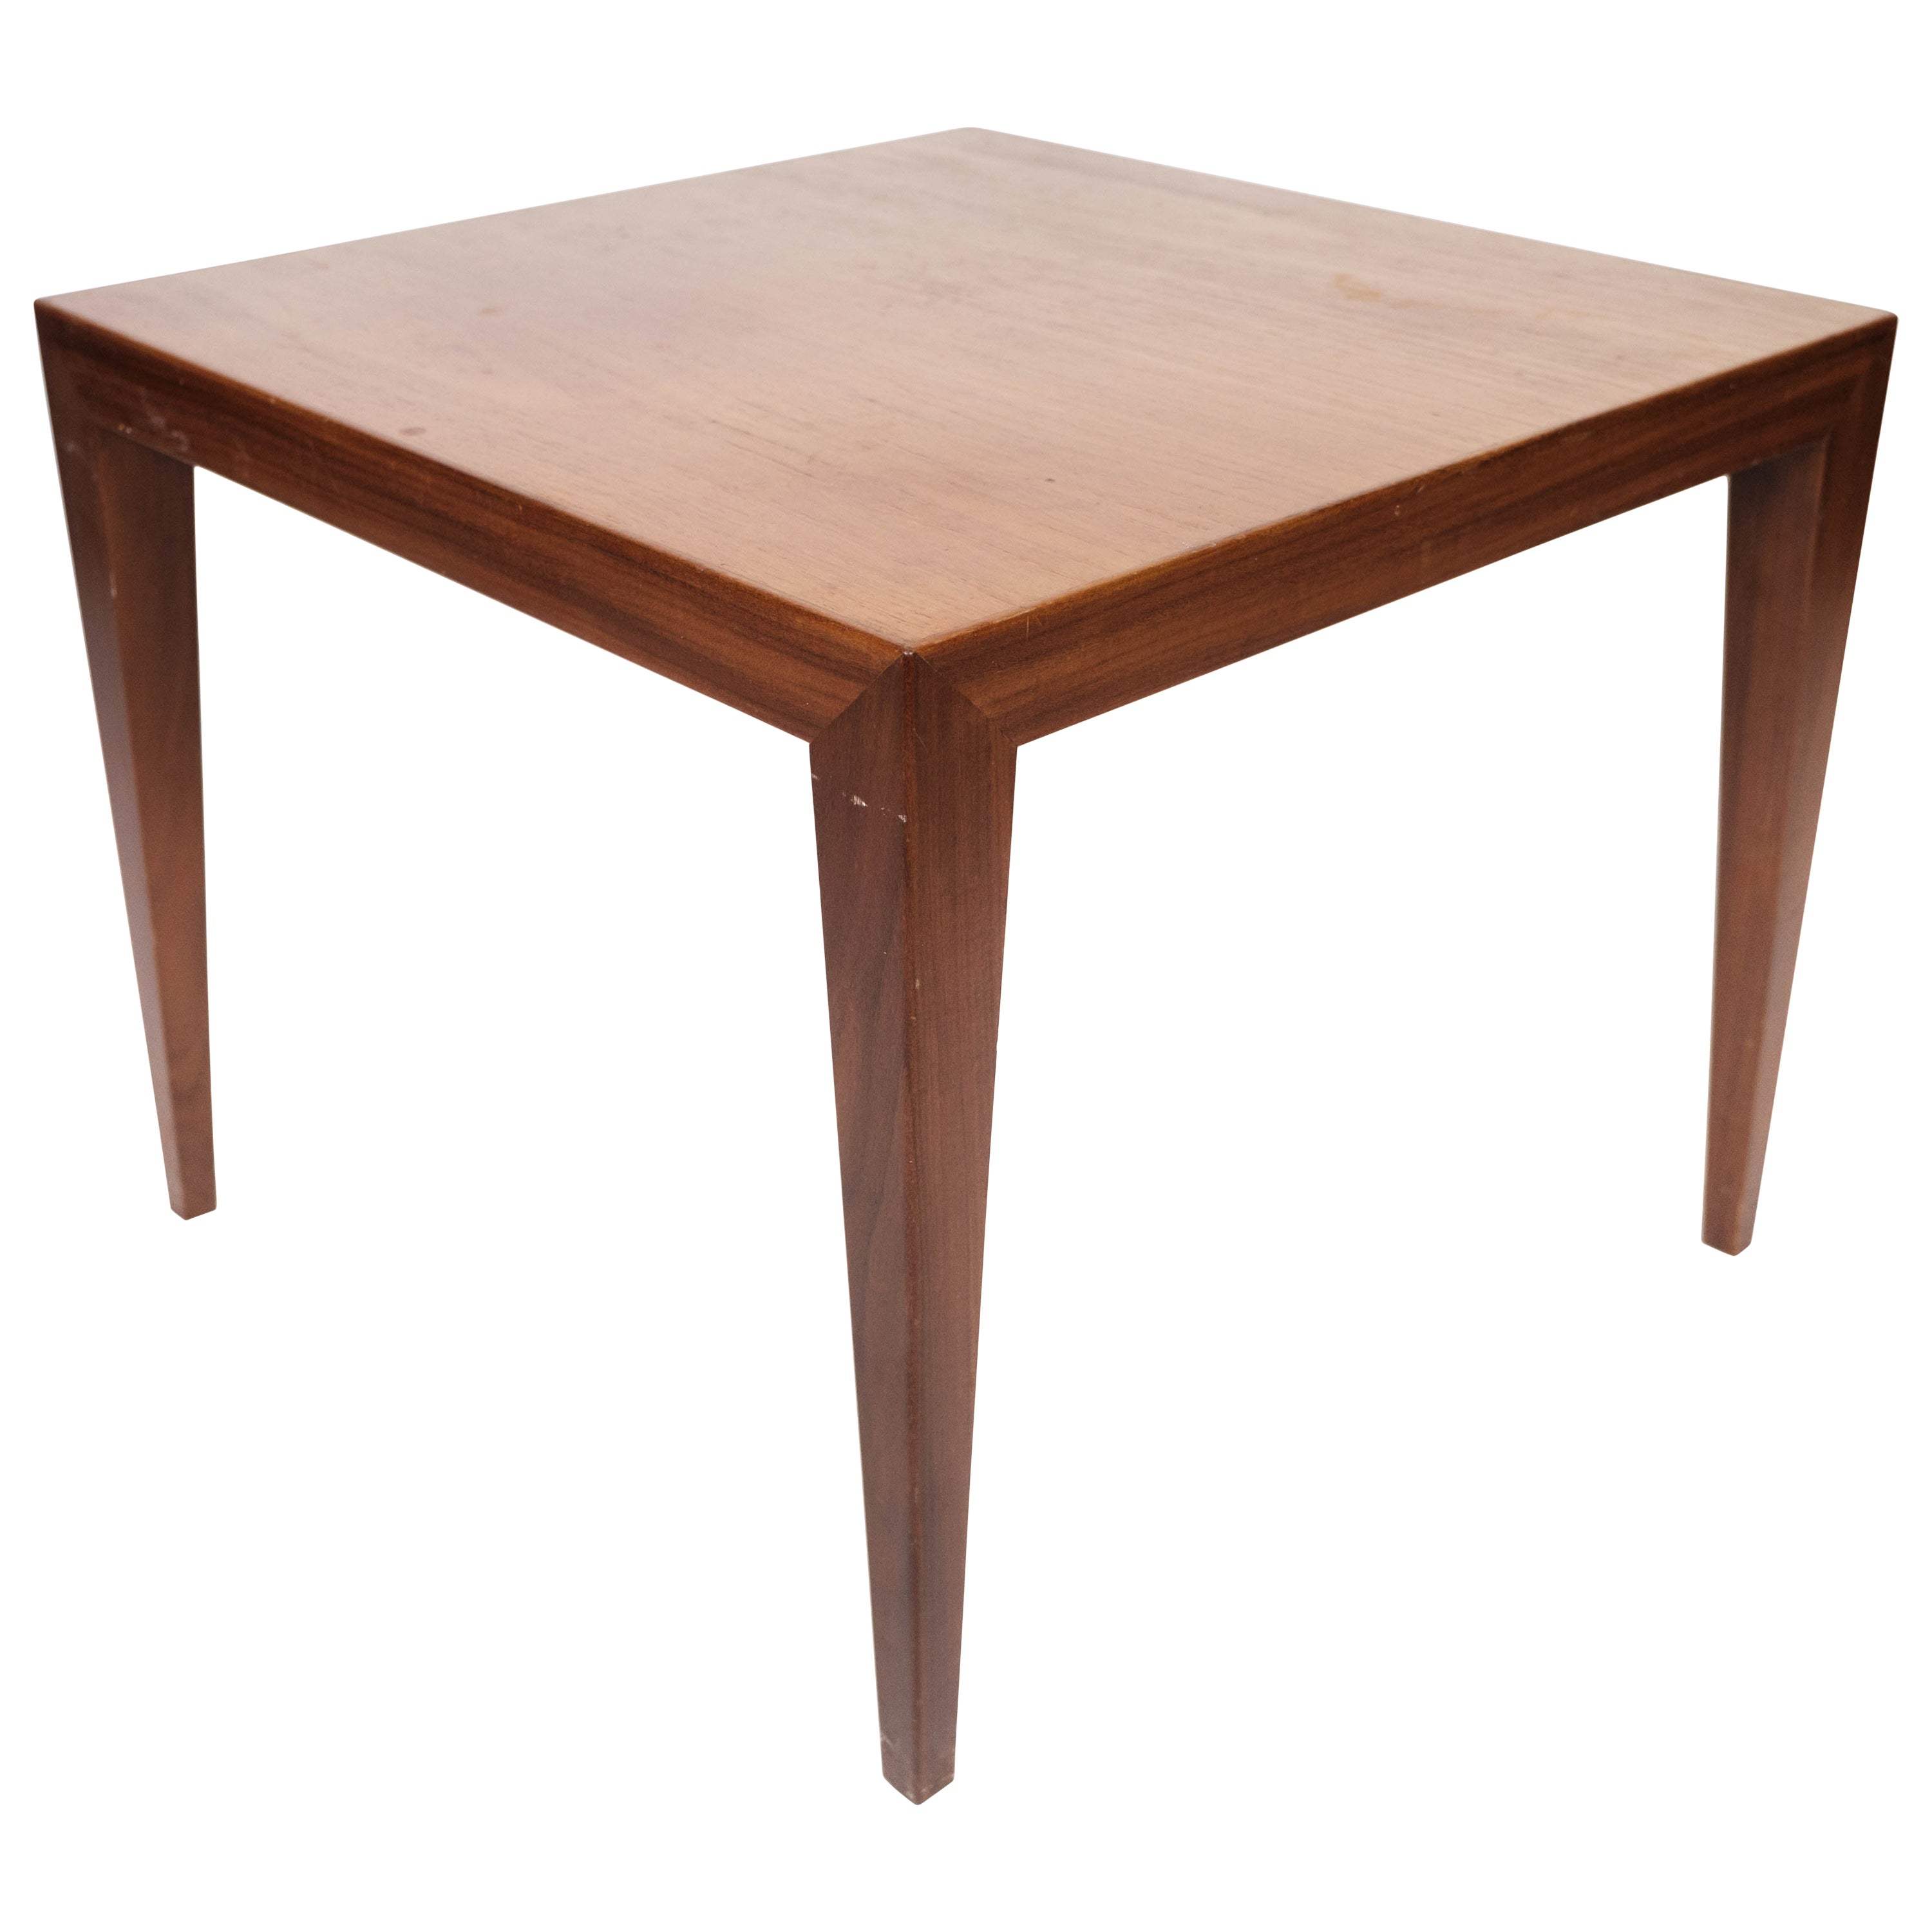 Side Table in Teak of Danish Design Manufactured by Haslev Furniture, 1960s